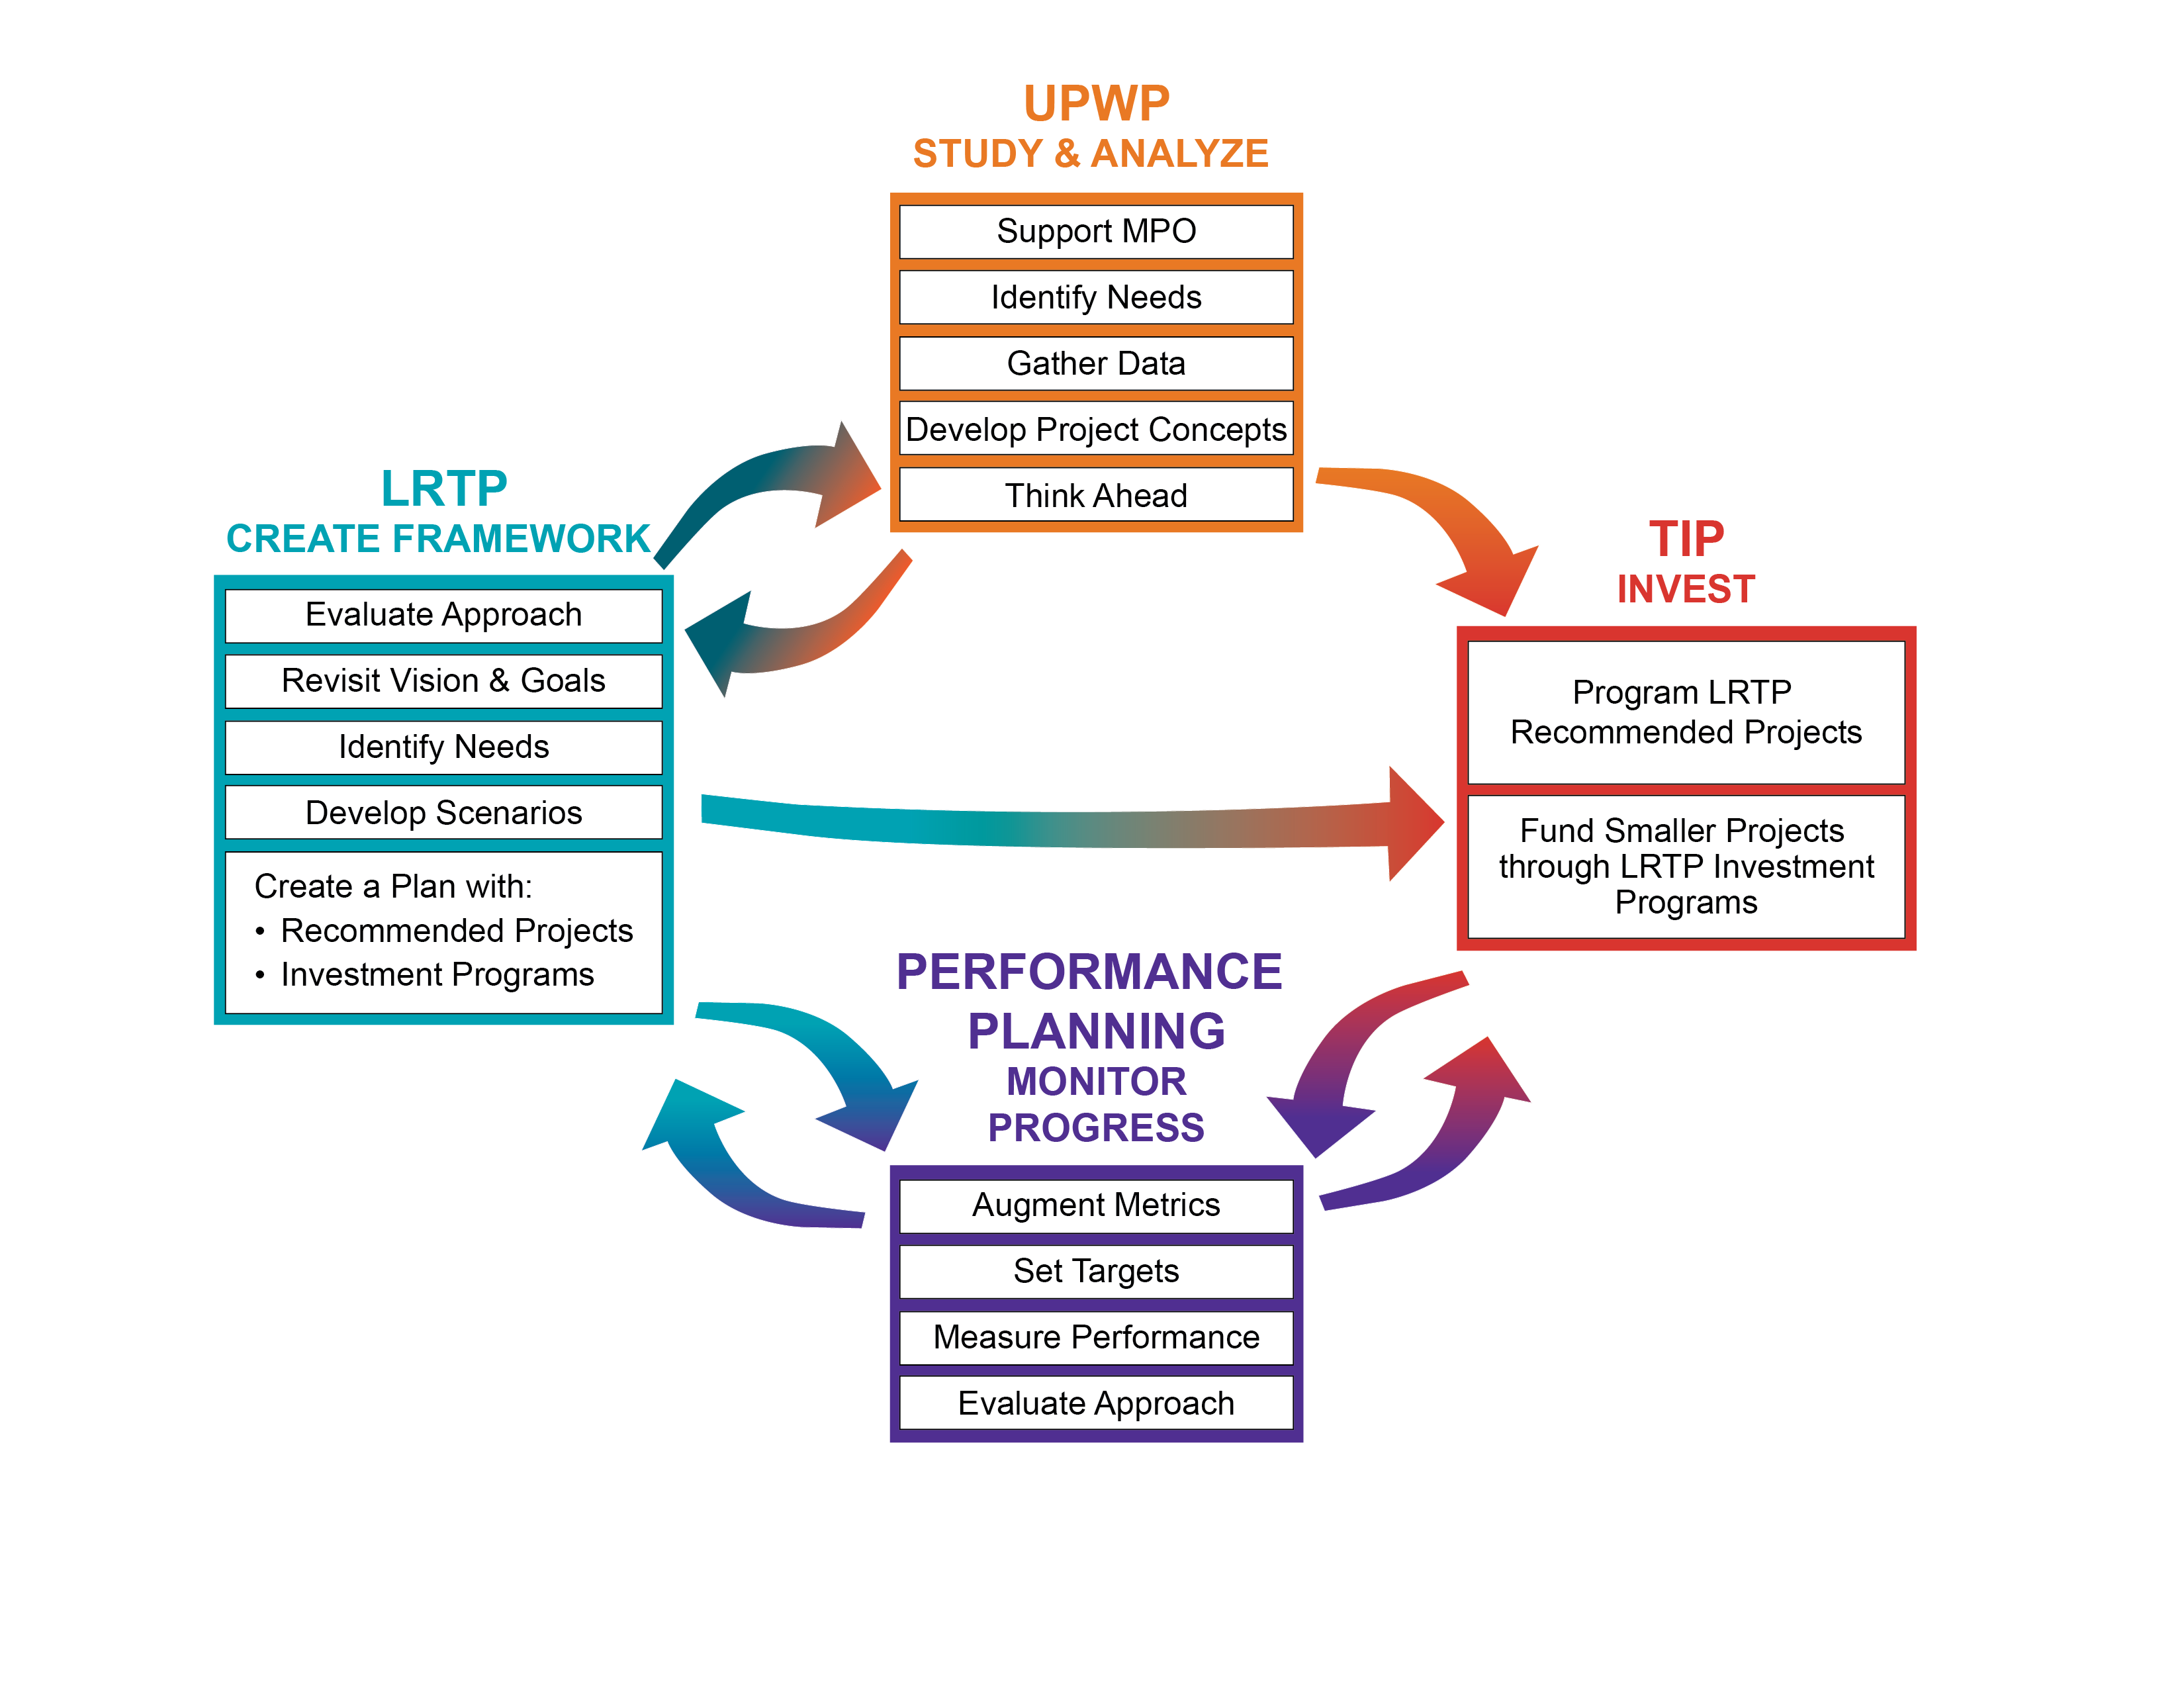 figure showing the relationships between the LRTP,UPWP, TIP, and Performance-based Planning Process